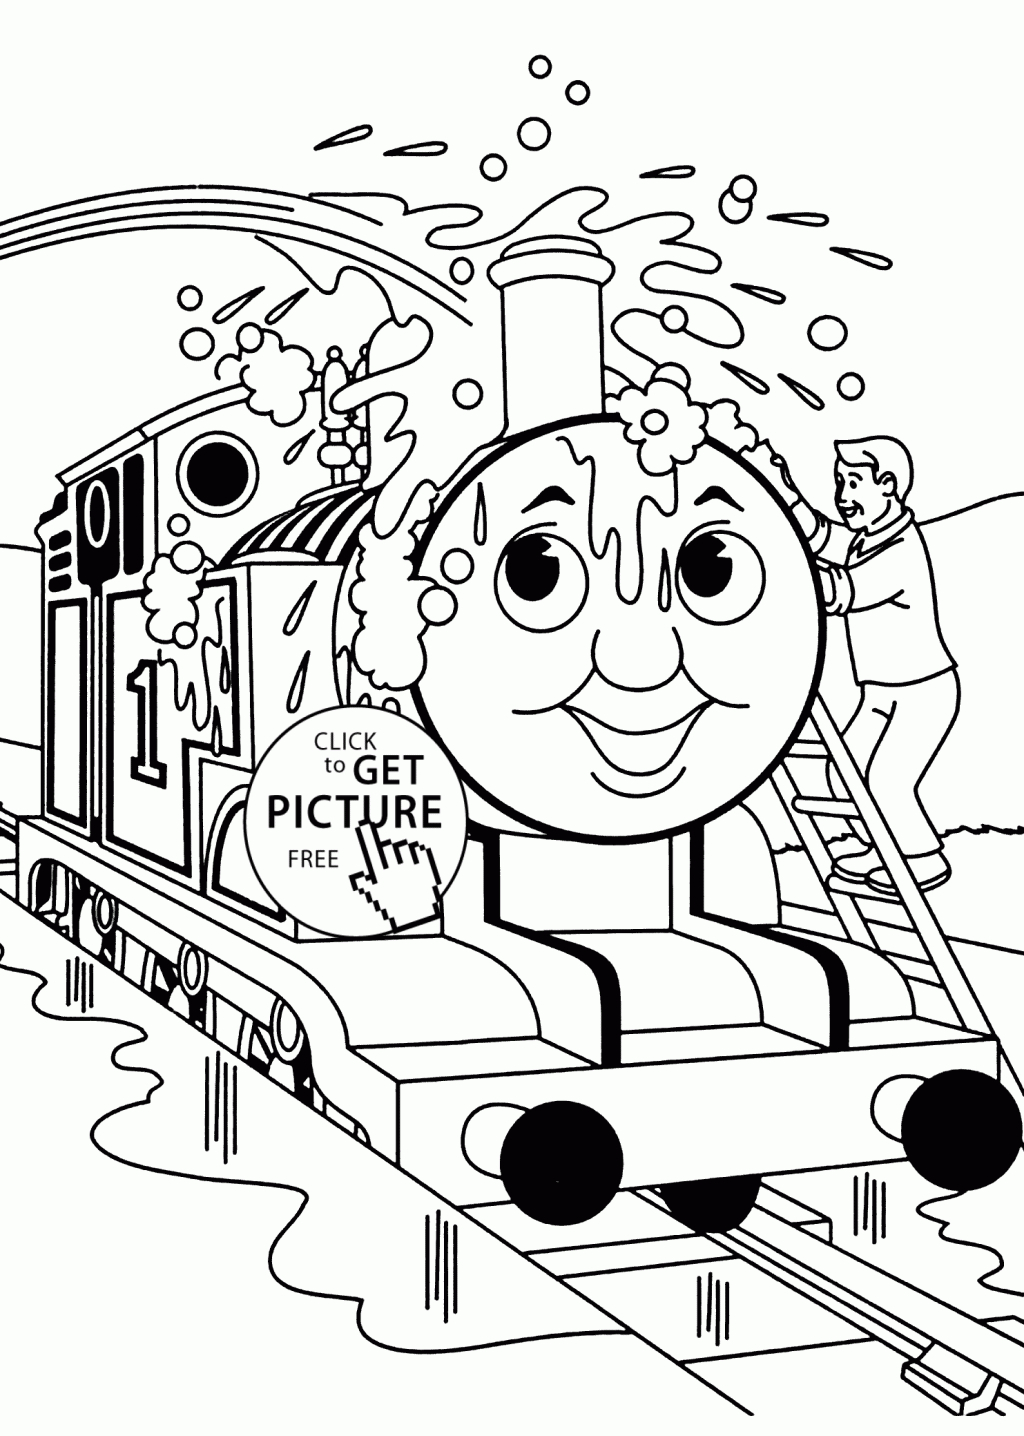 Thomas Coloring Pages Printable Coloring Page Best Thomas The Tank Engine Colourings And Friends